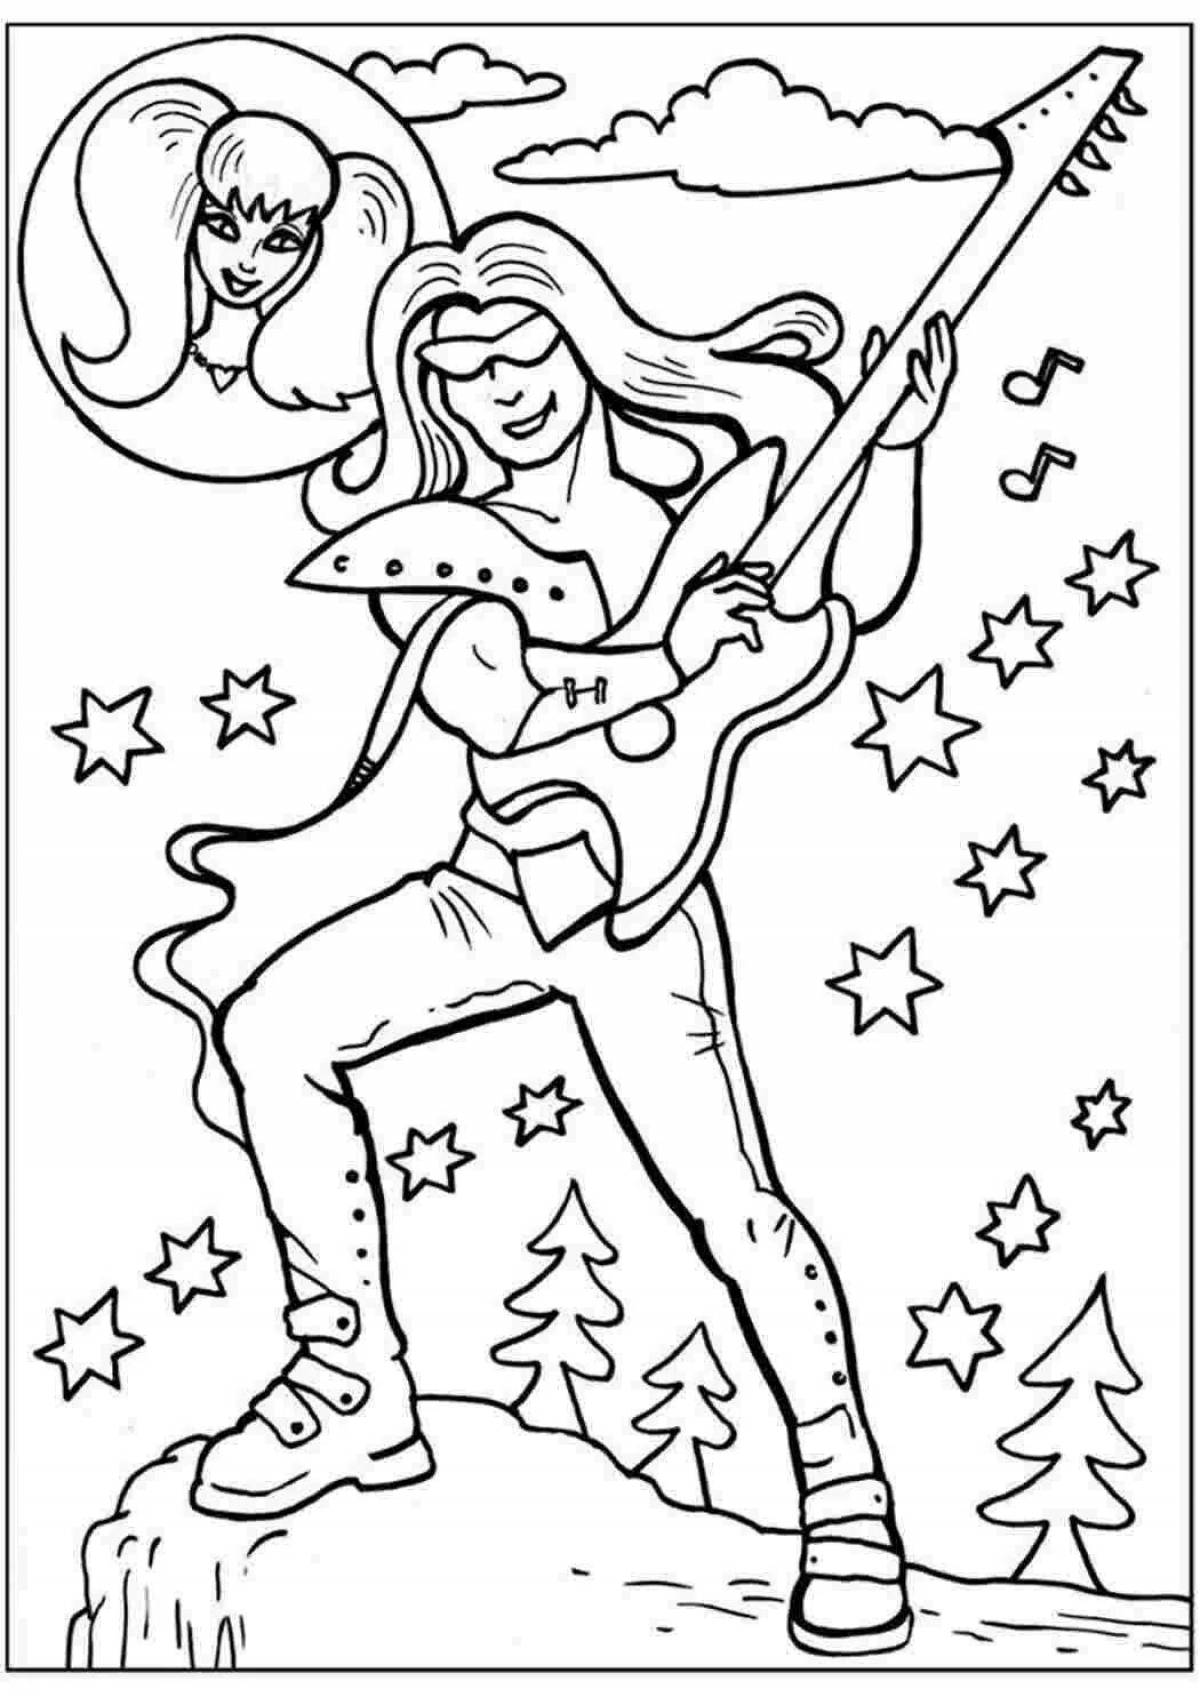 Troubadour animated coloring page